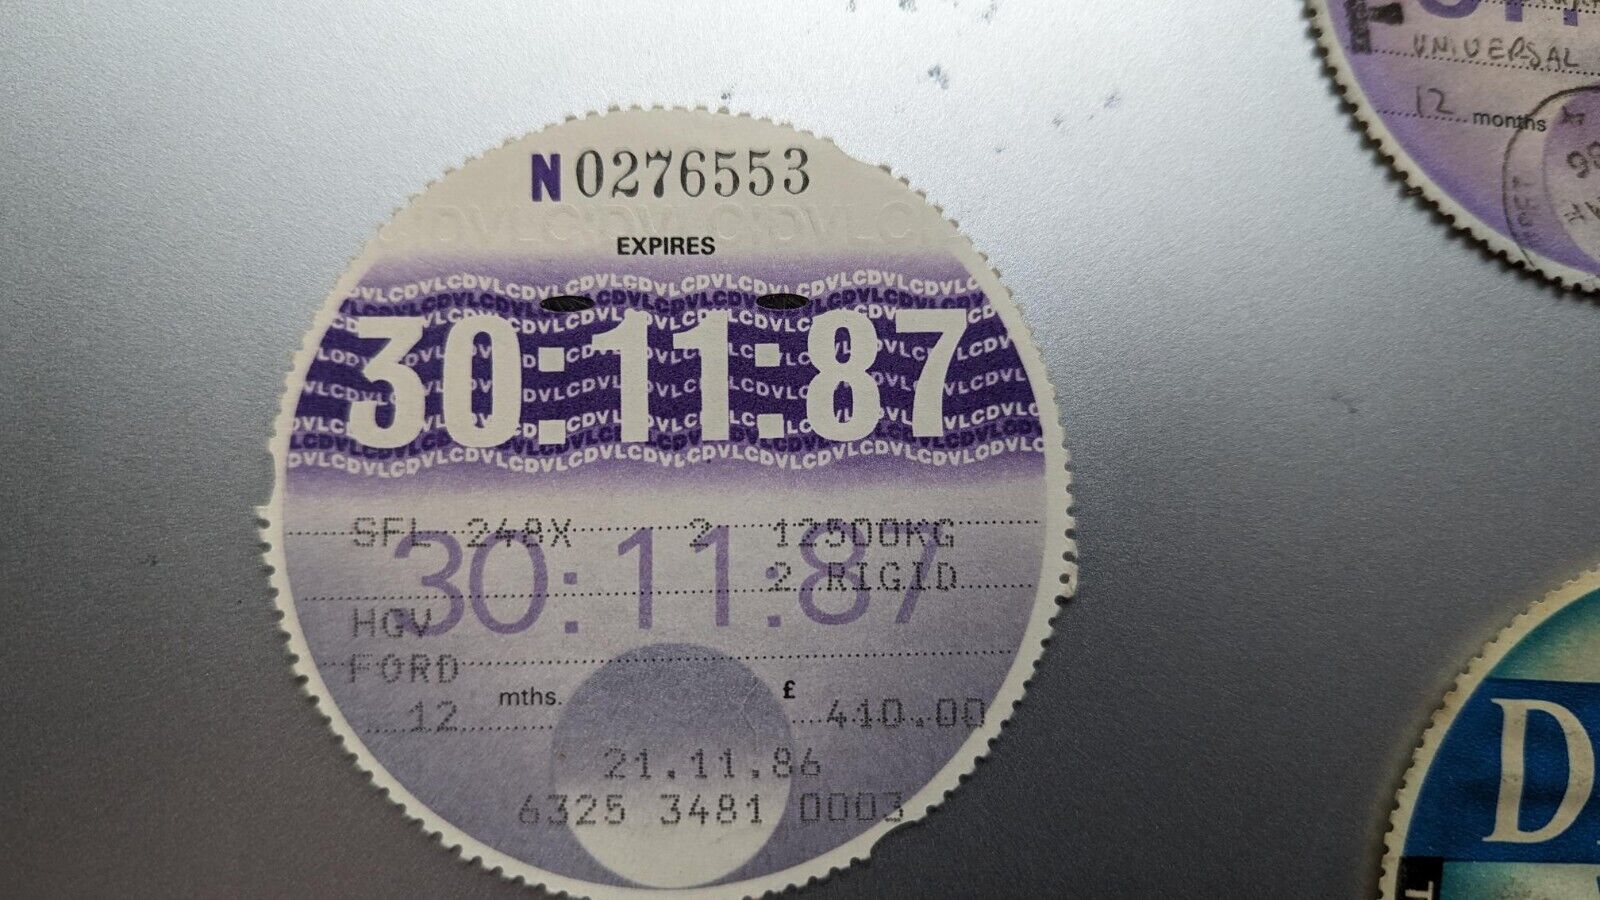 Rare Collectable old tax disc from NOV 1987............       .